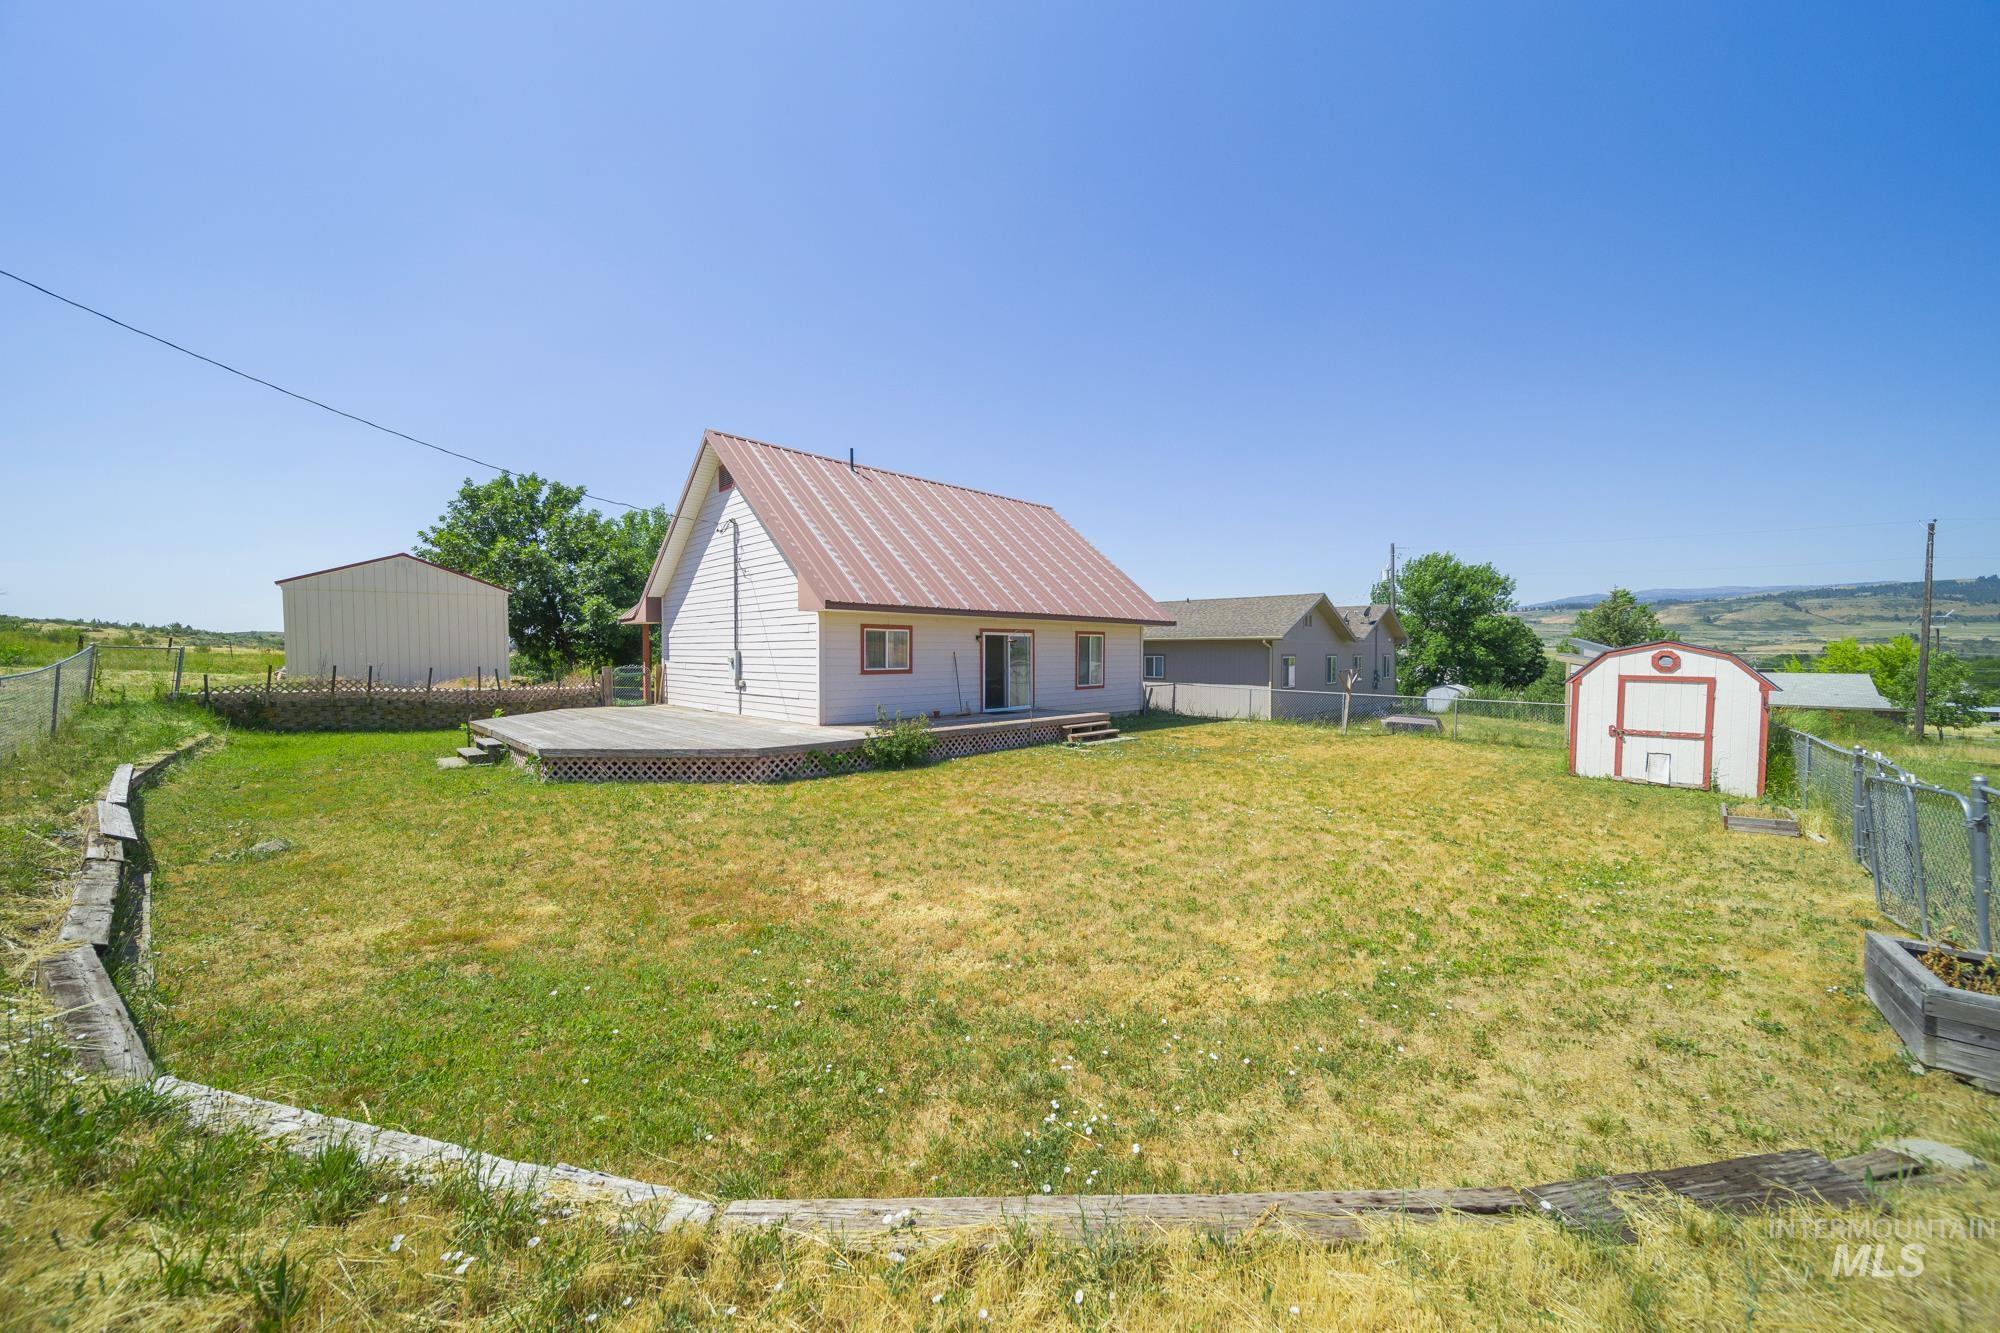 608 School Ave., Council, Idaho 83612, 4 Bedrooms, 2 Bathrooms, Residential For Sale, Price $250,000,MLS 98851671